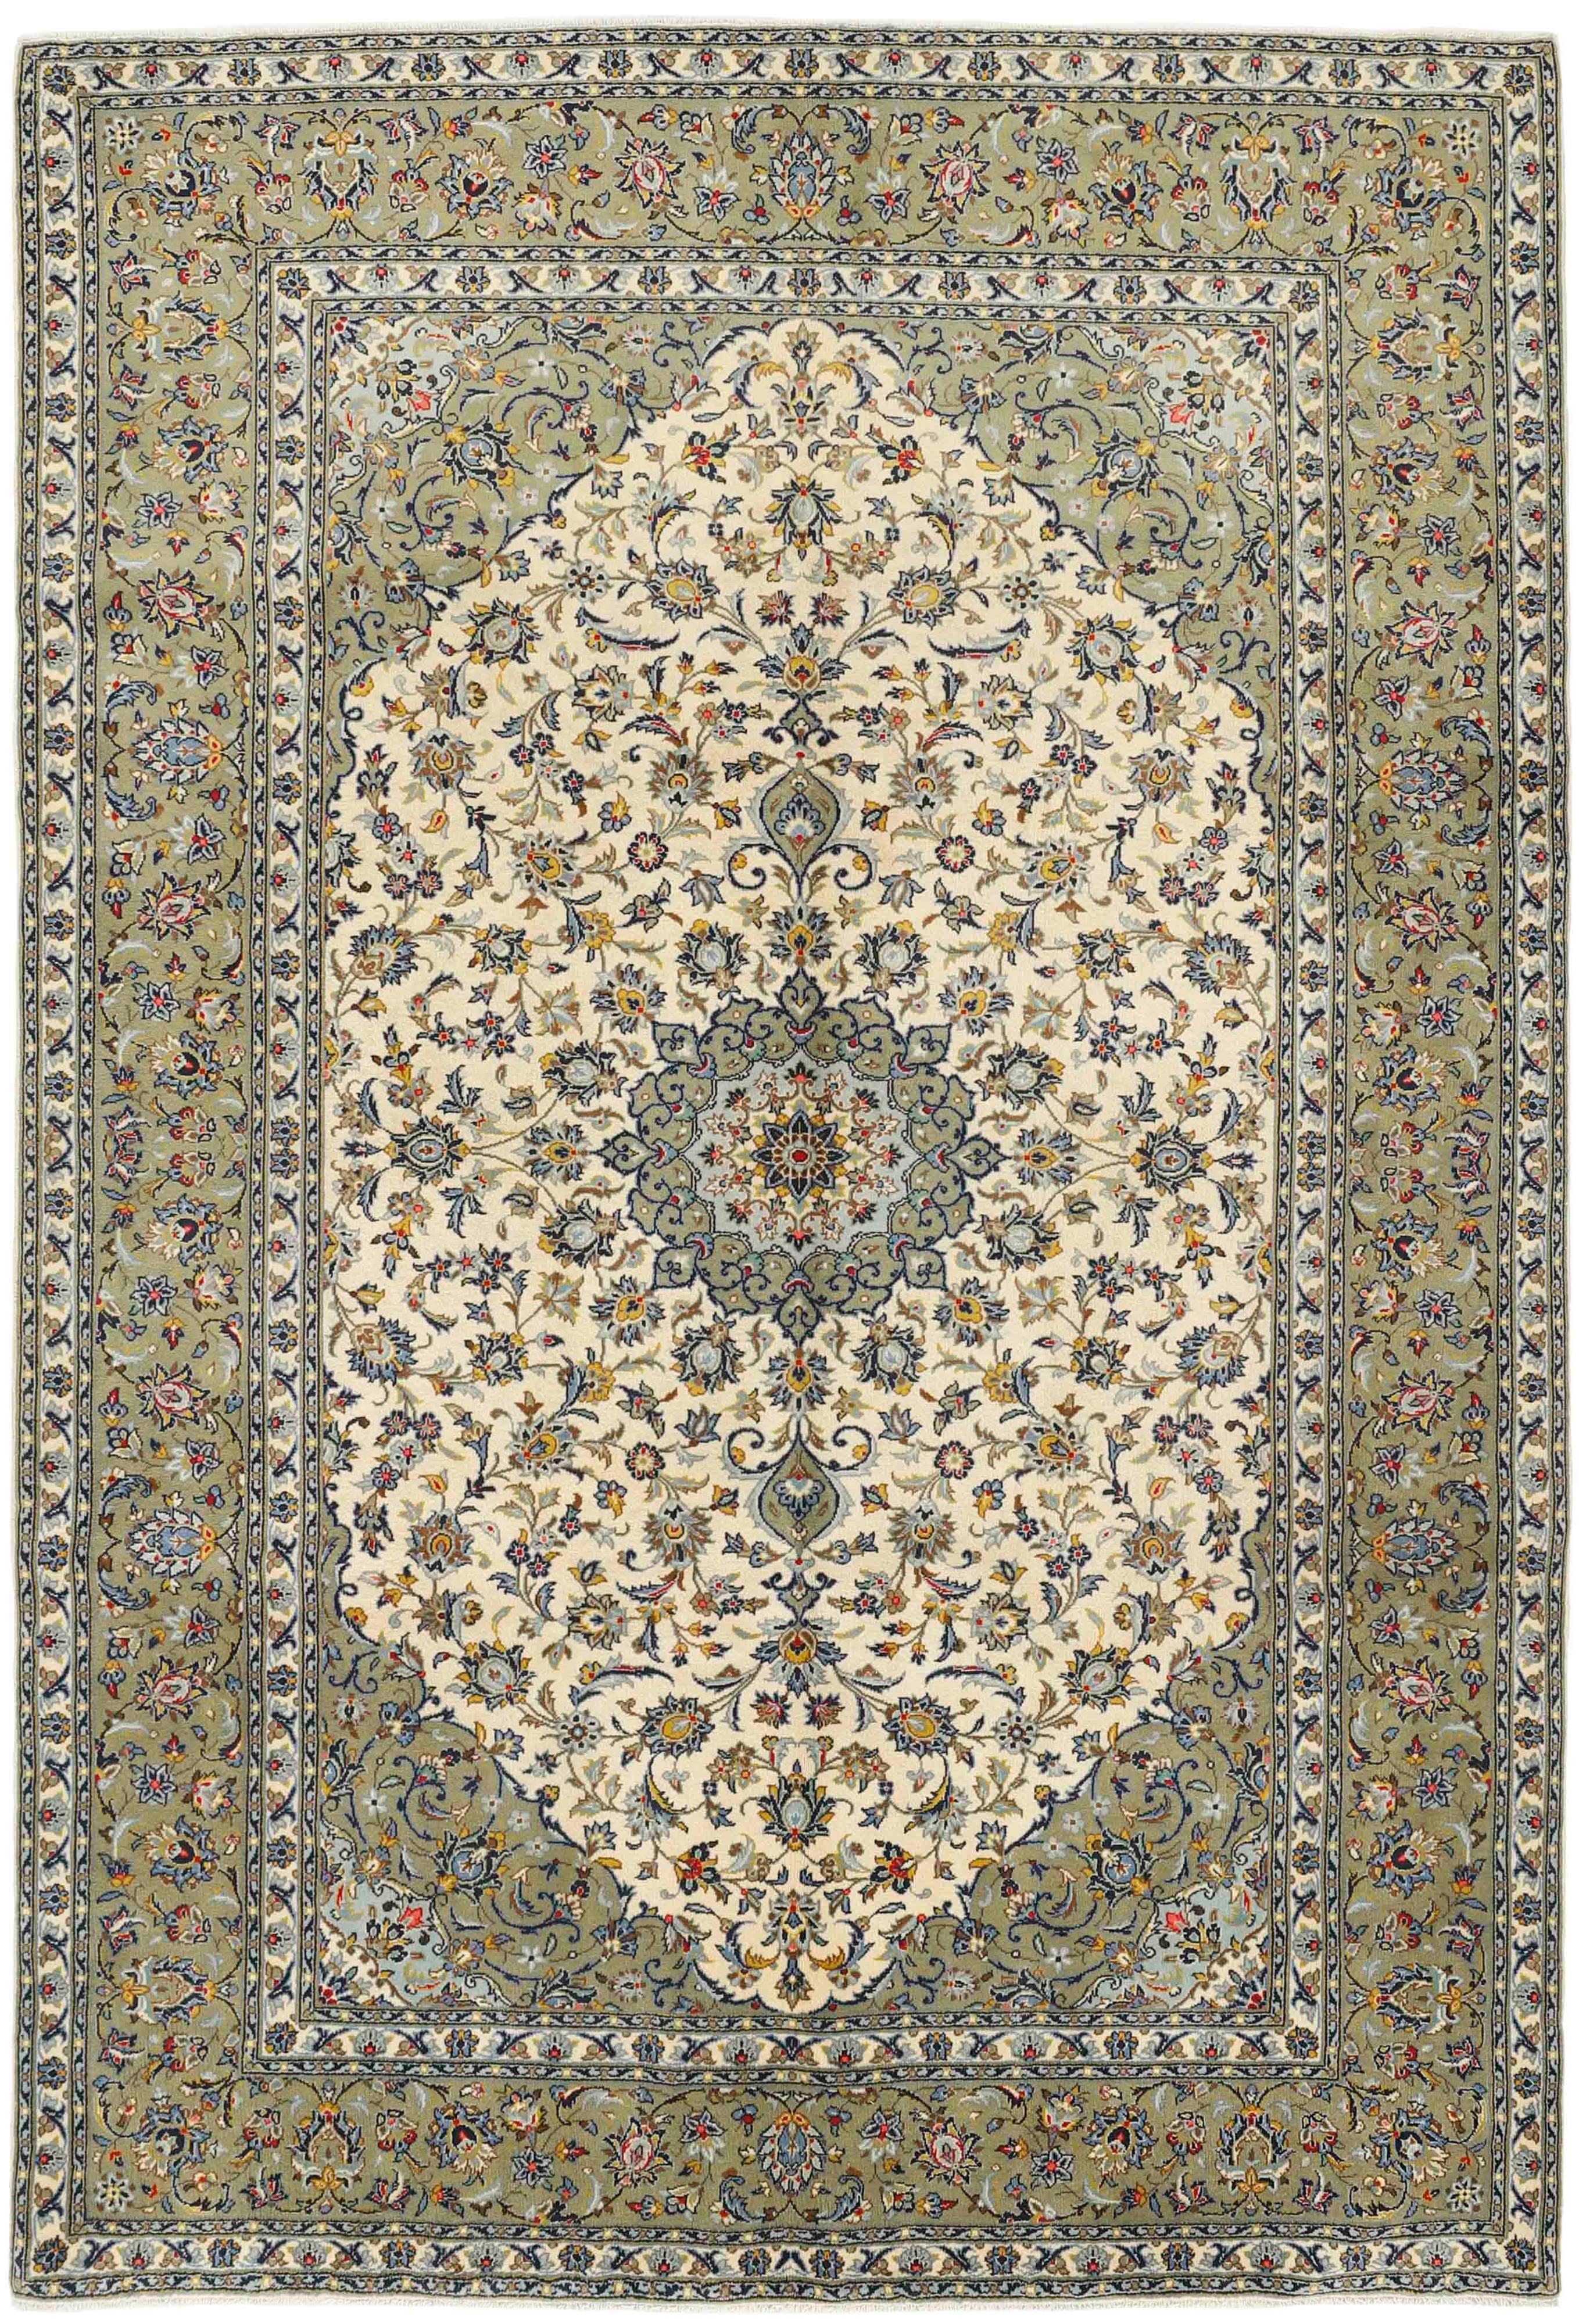 Authentic persian rug with traditional floral design in red, blue, beige and brown